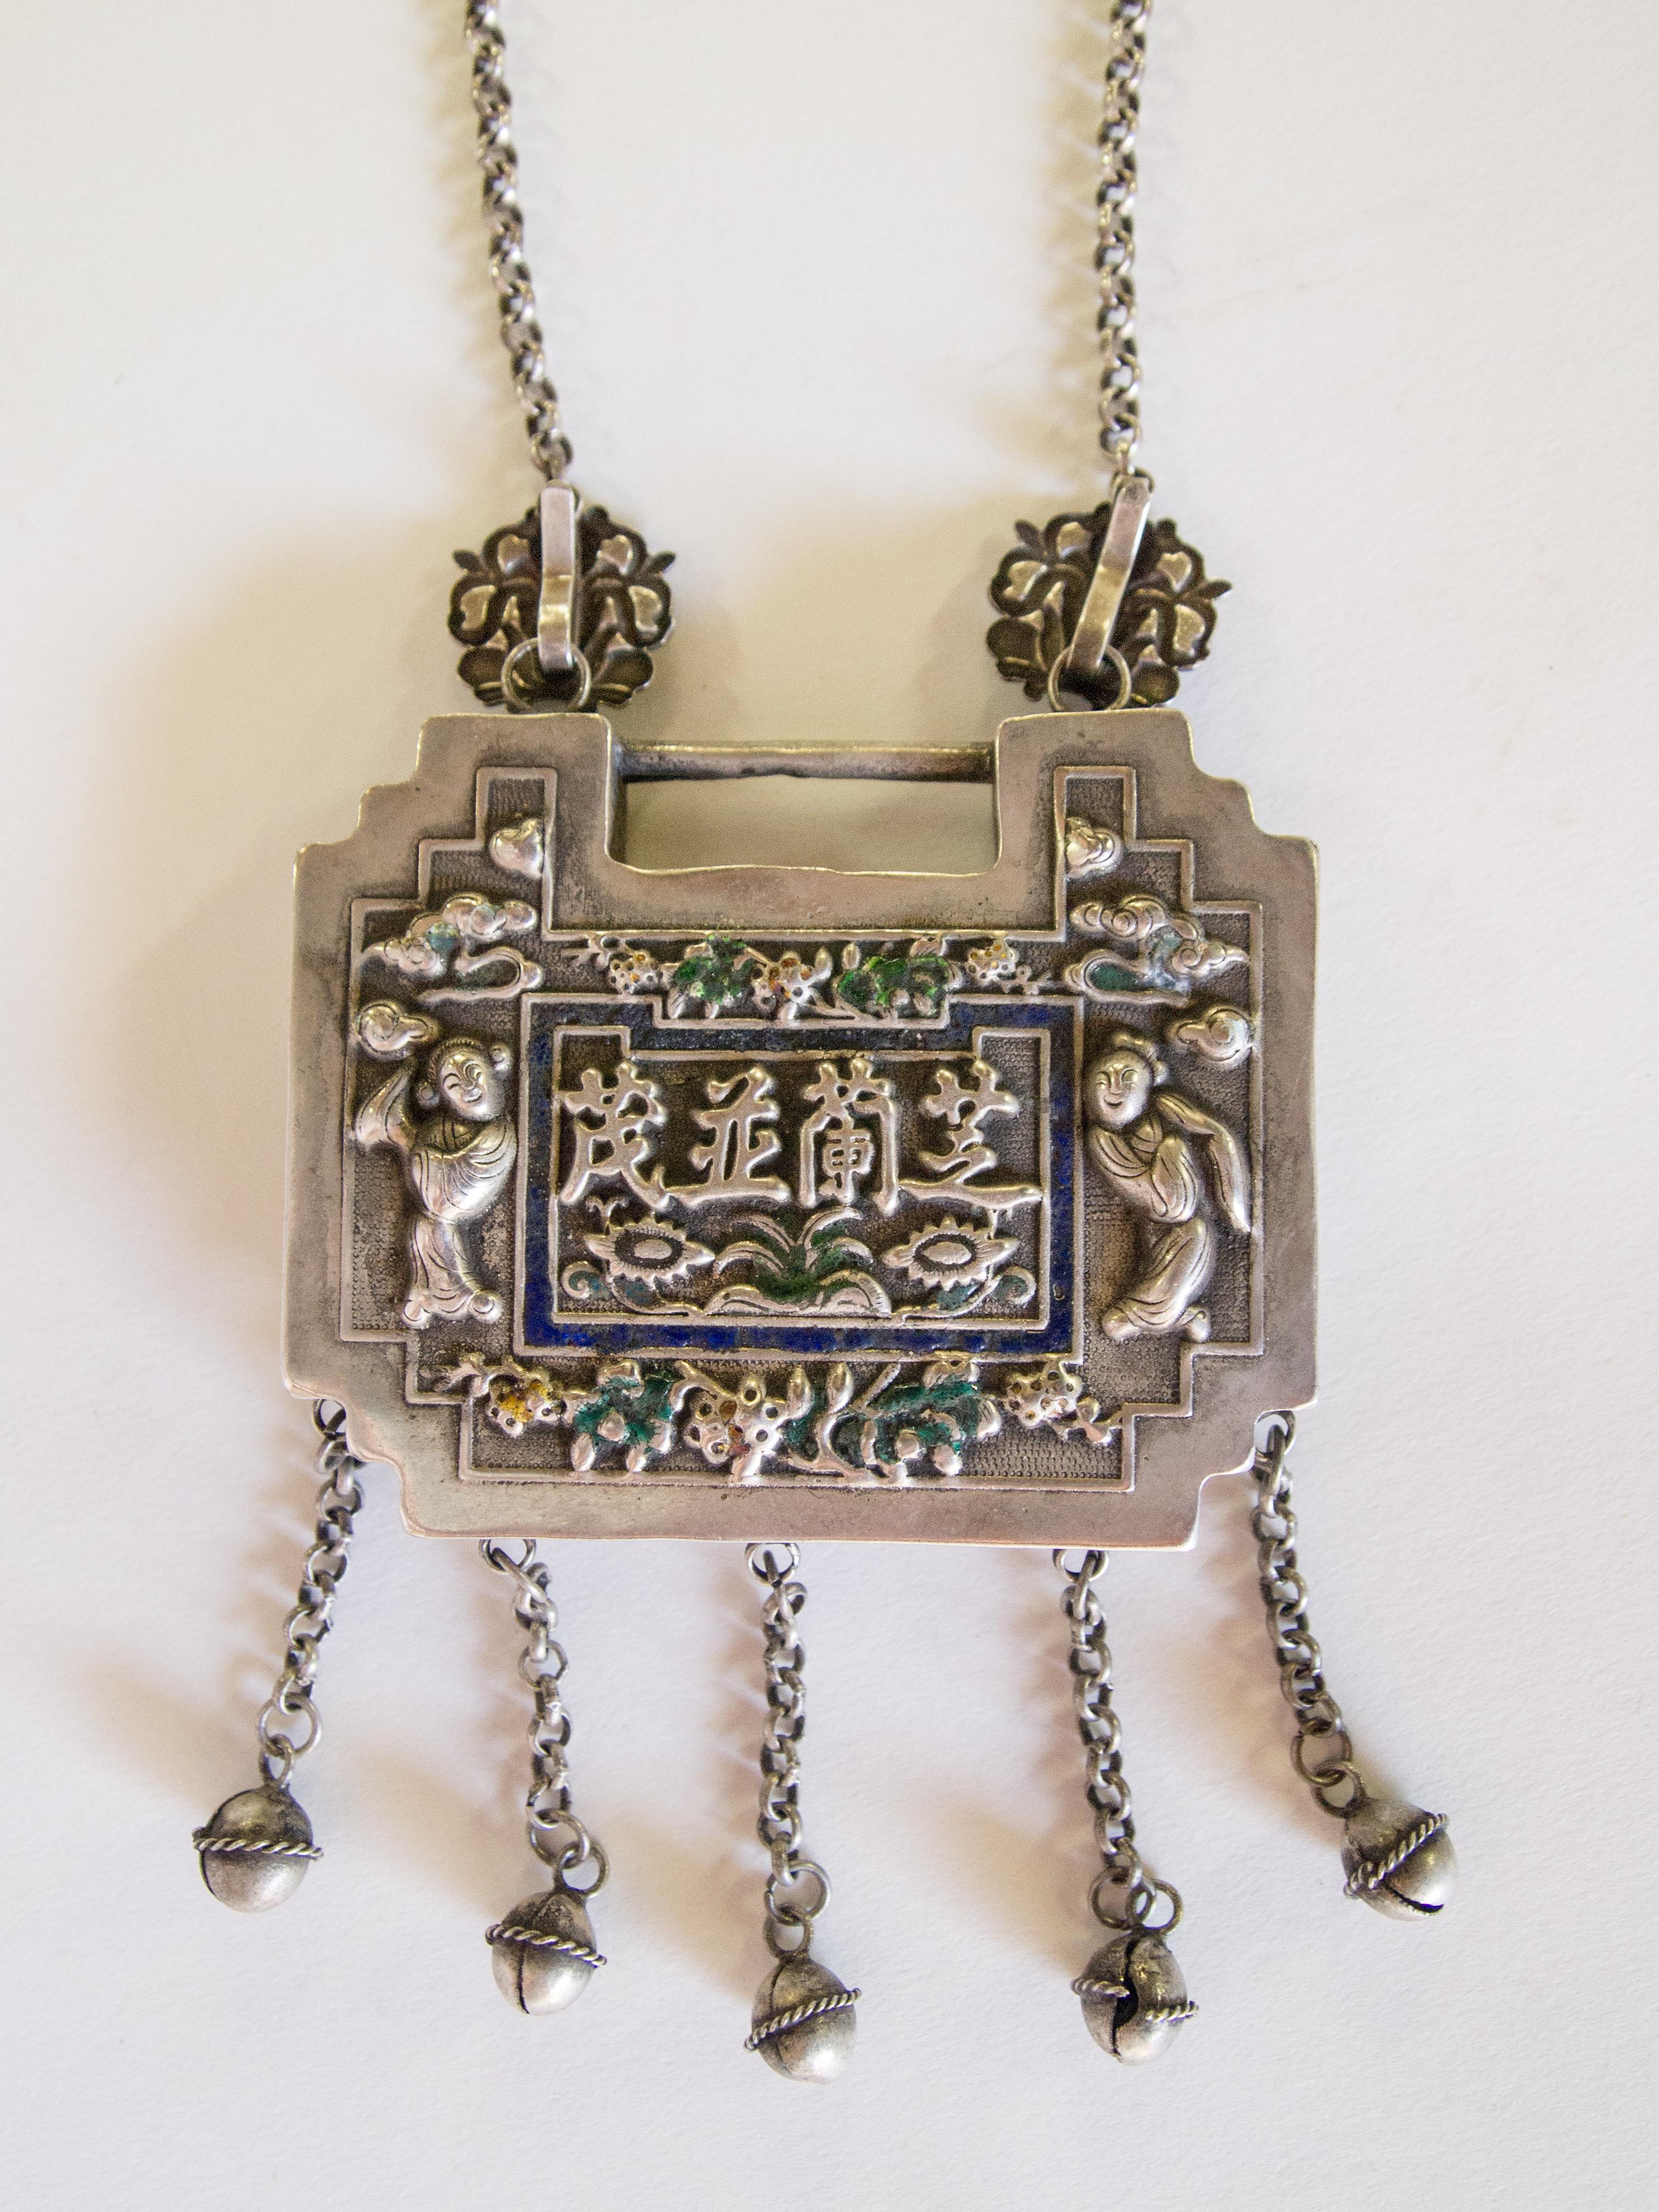 Tribal Child Amulet Lock, Silver Alloy, Yao or Hmong of SW China, Early 20th Century